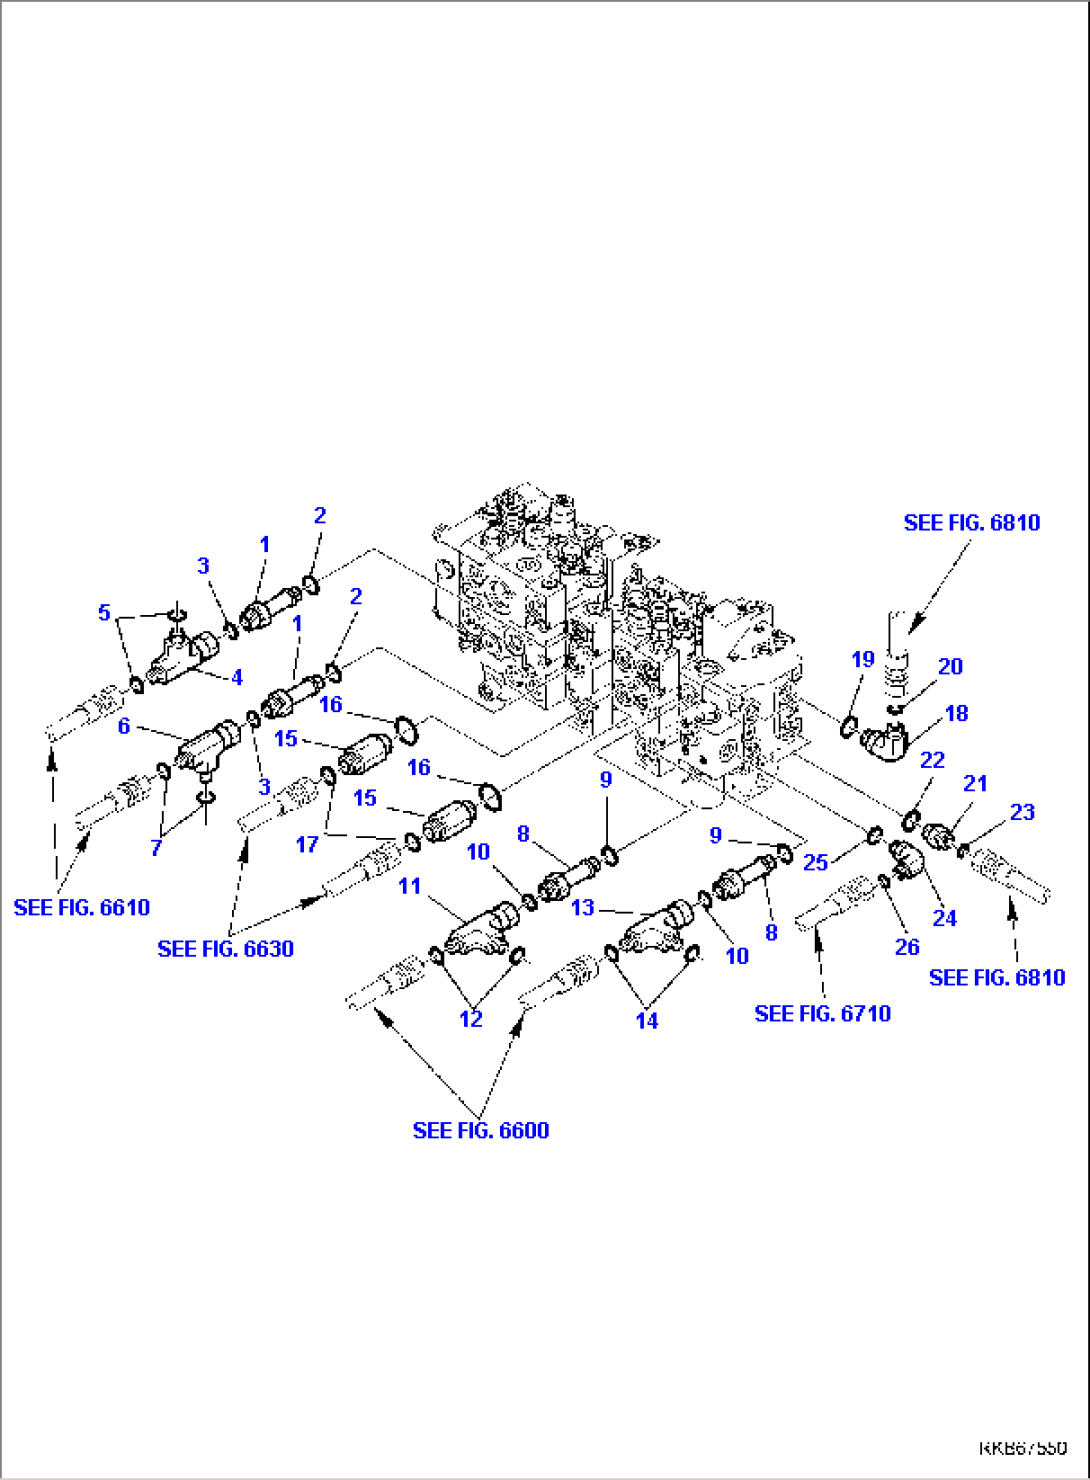 10-SPOOL CONTROL VALVE (MECHANICAL CONTROL) (CONNECTING PARTS) (3/3)